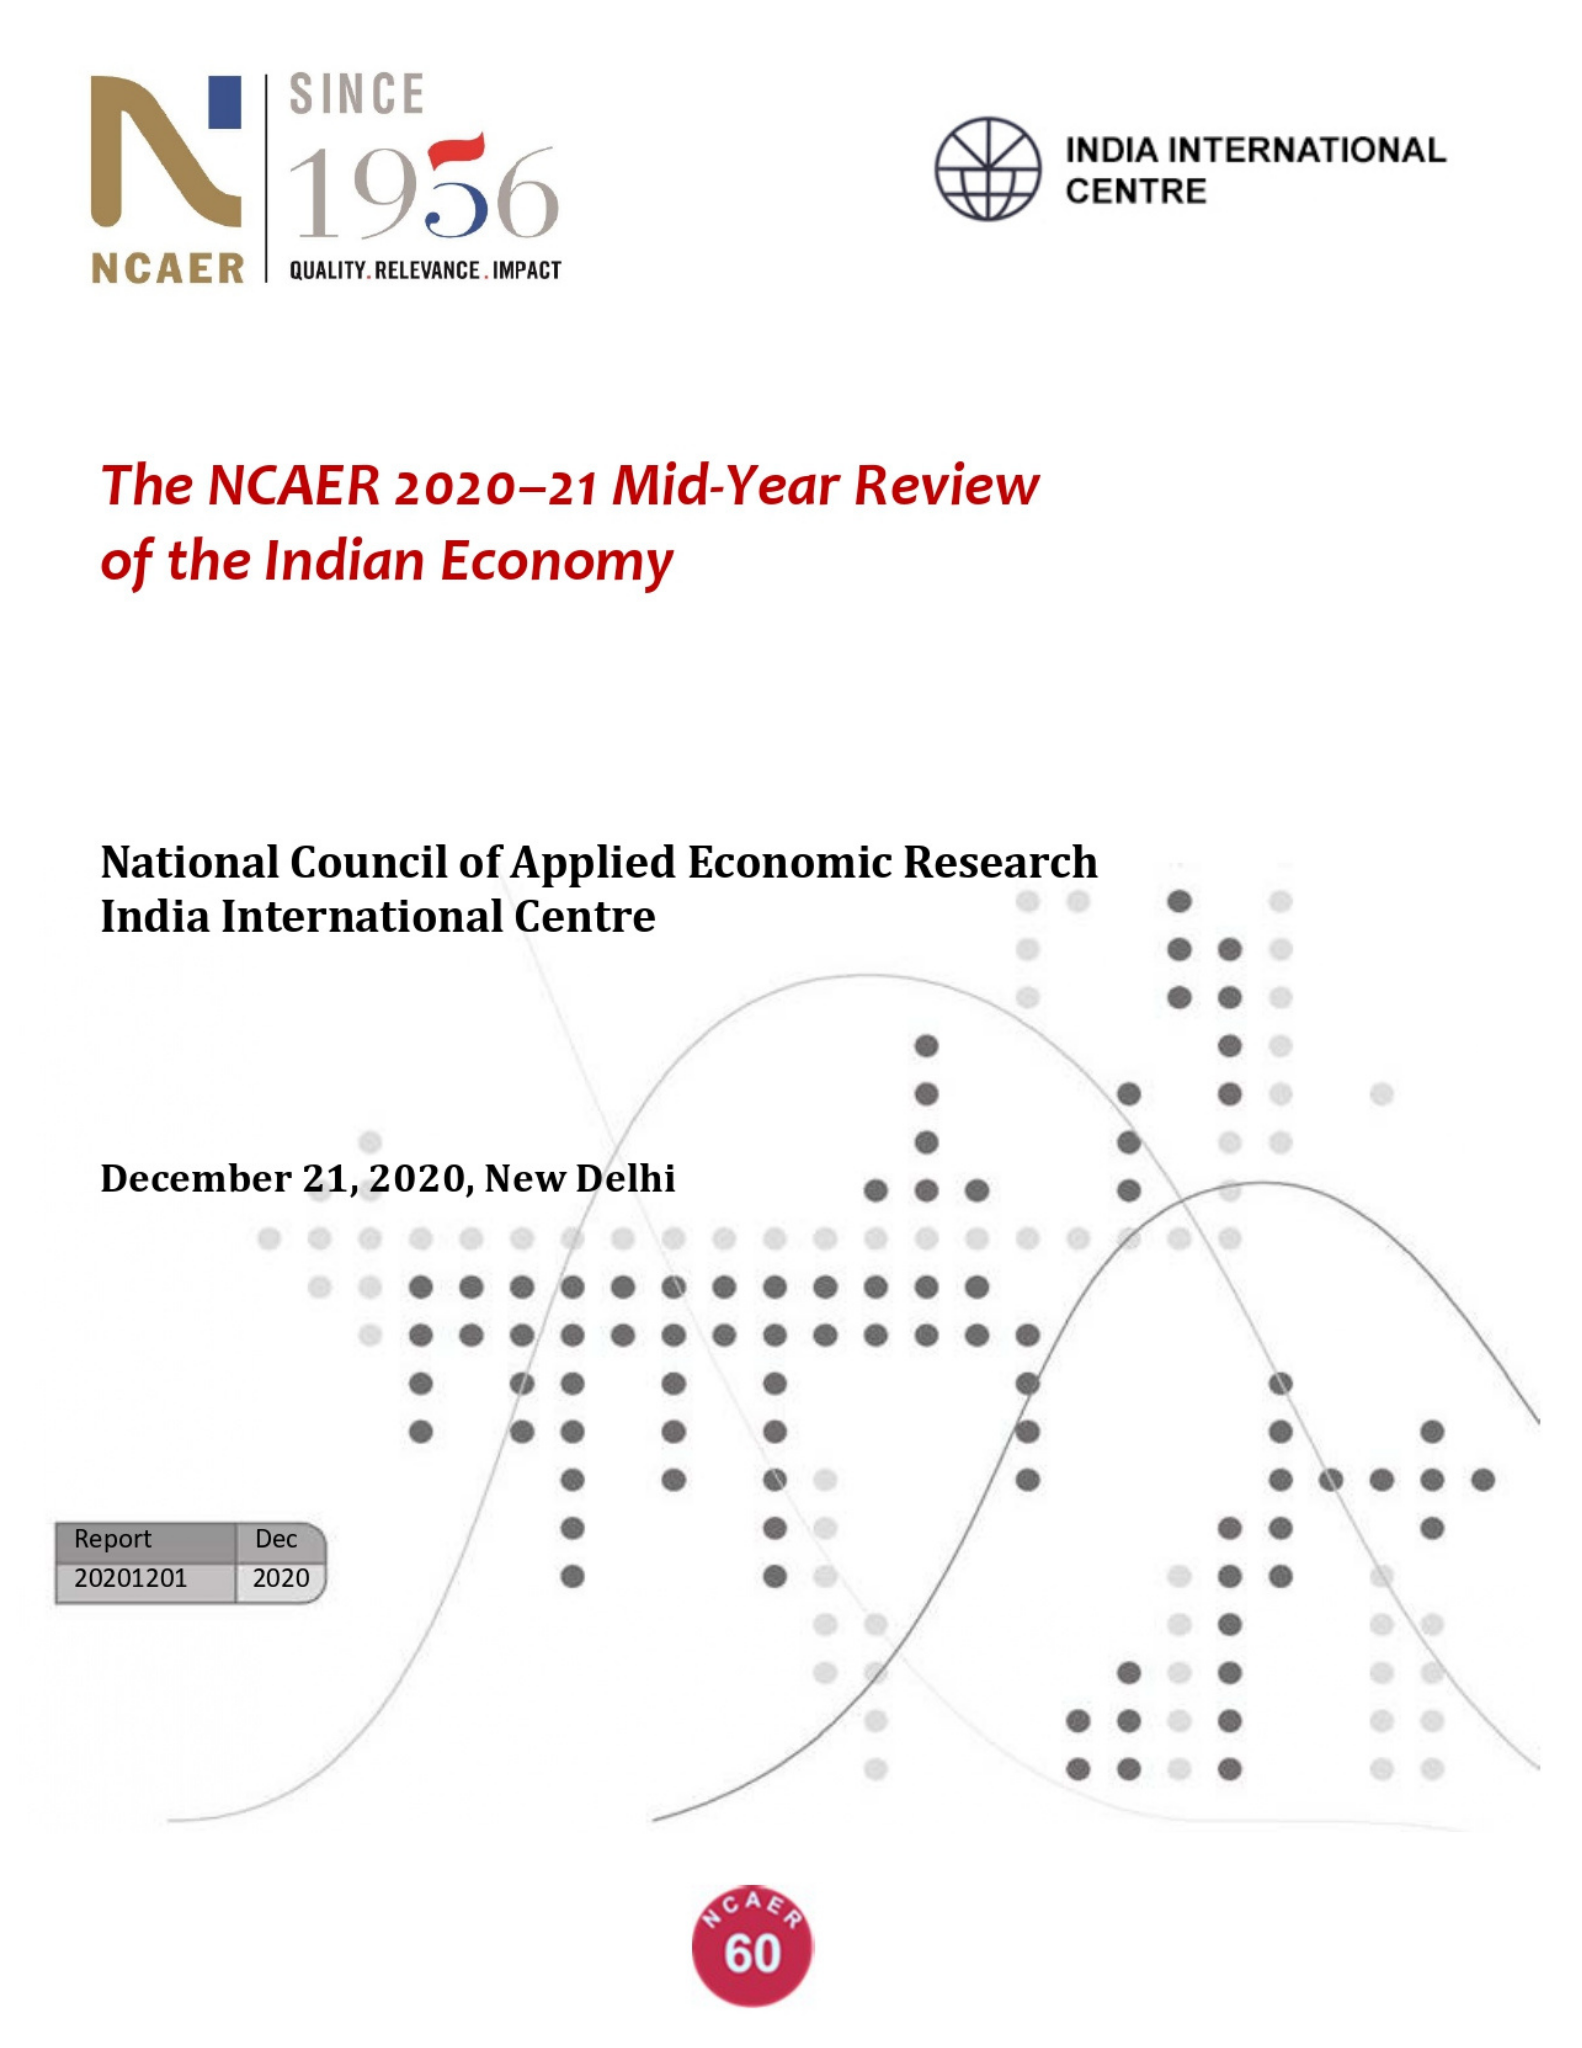 The NCAER 2020–21 Mid-Year Review of the Indian Economy